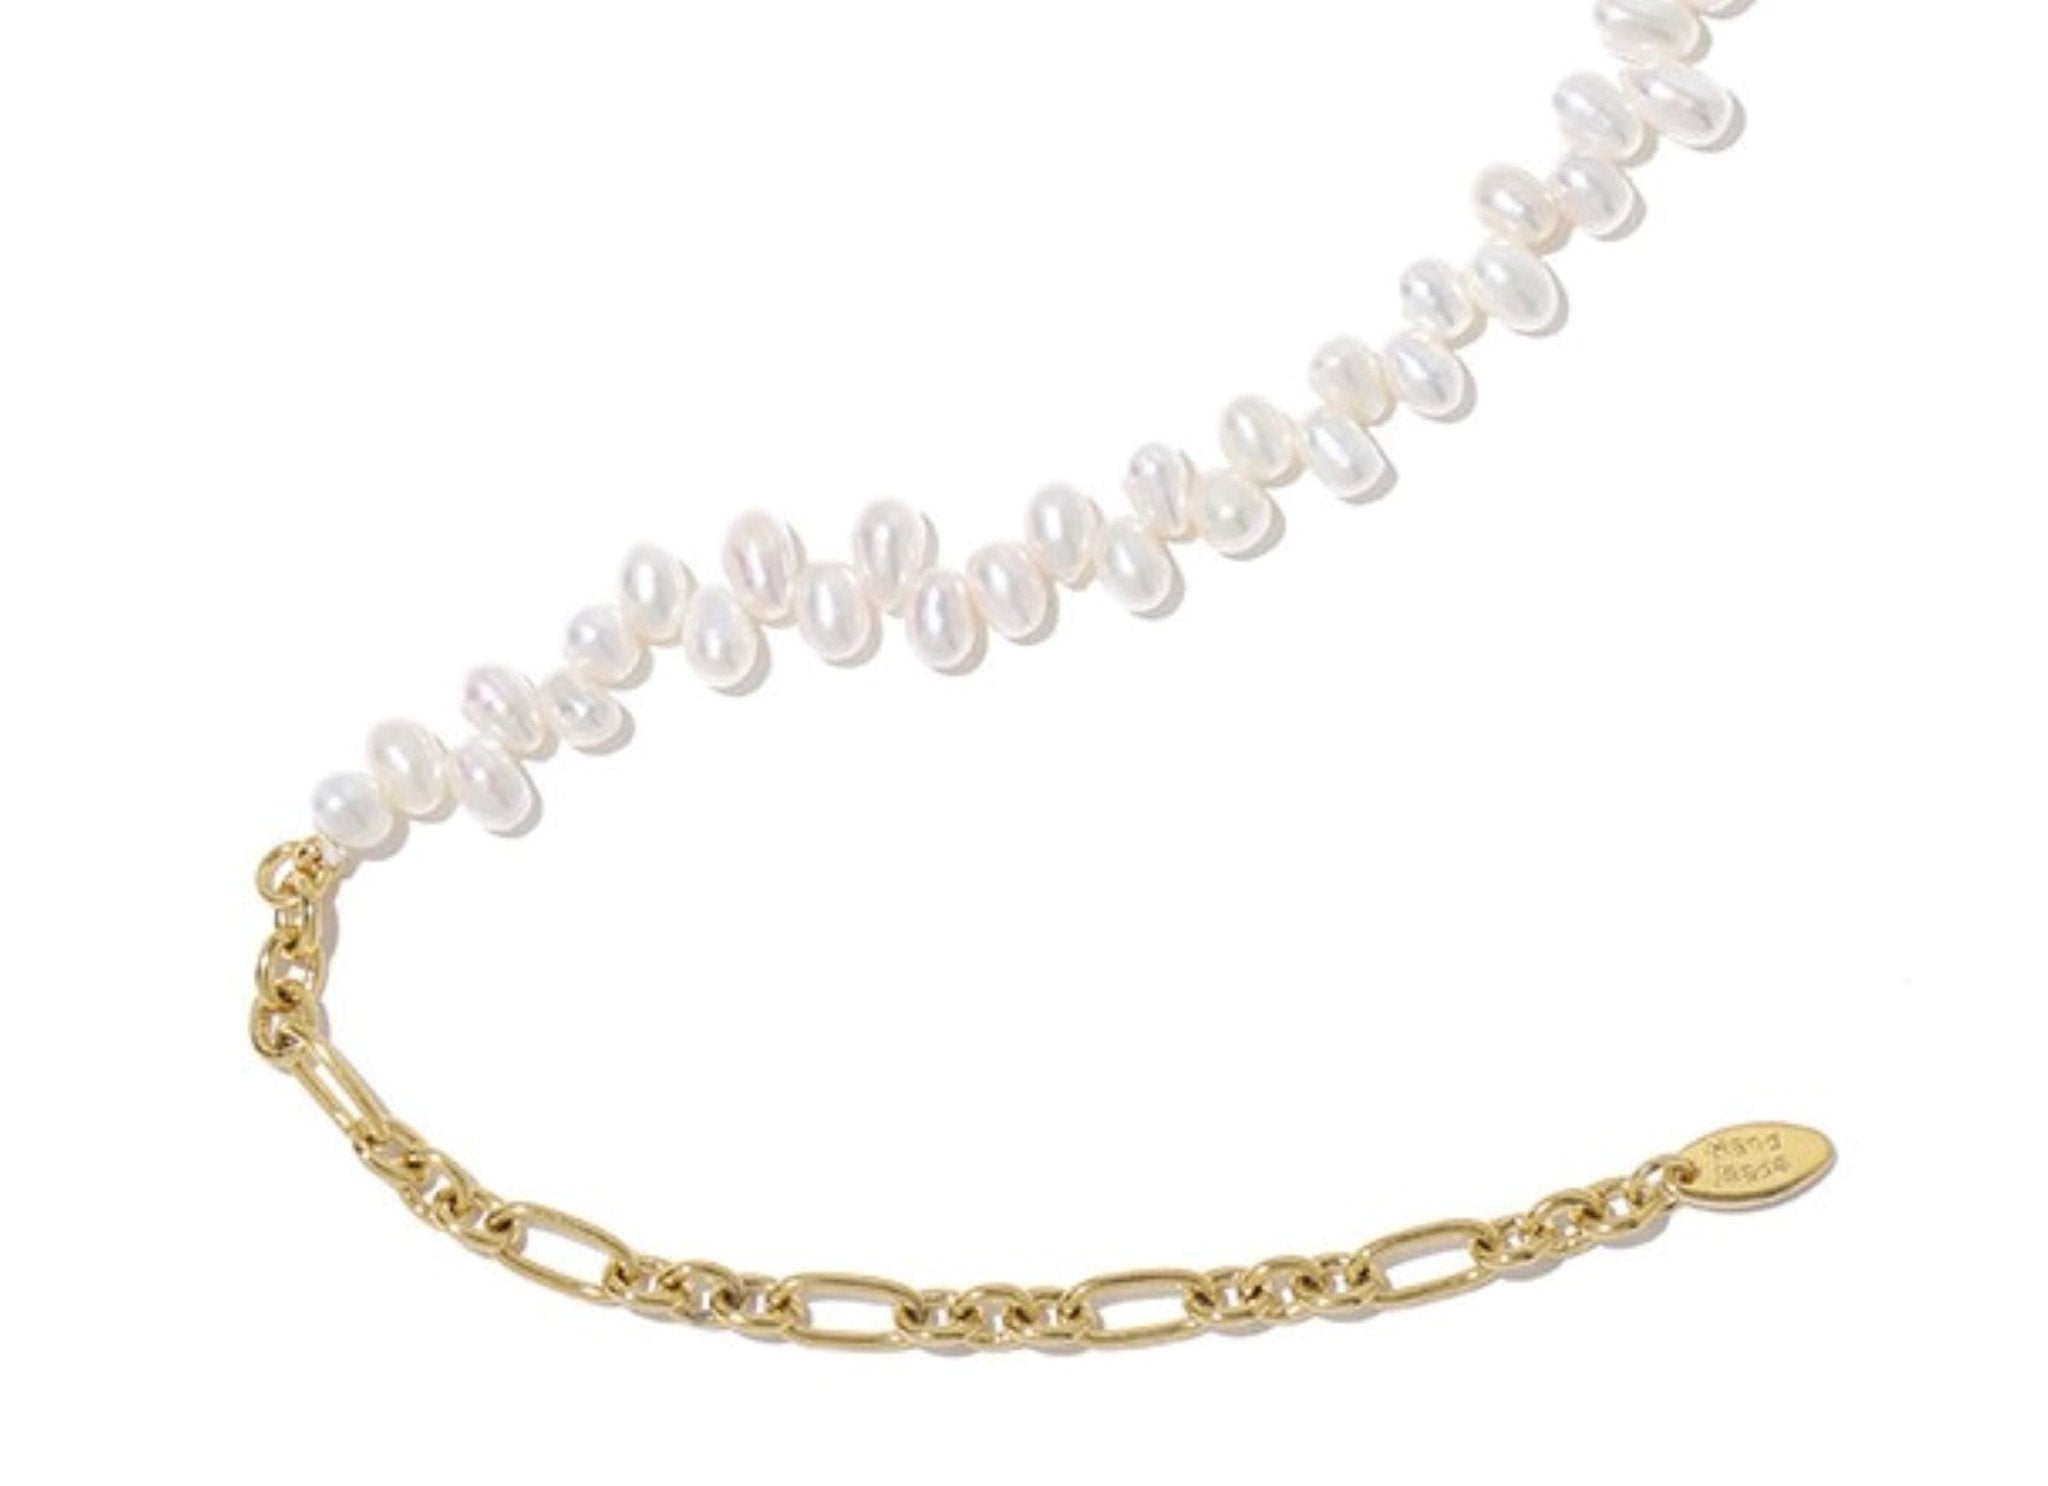 women-Necklace-freshwater pearl-gold